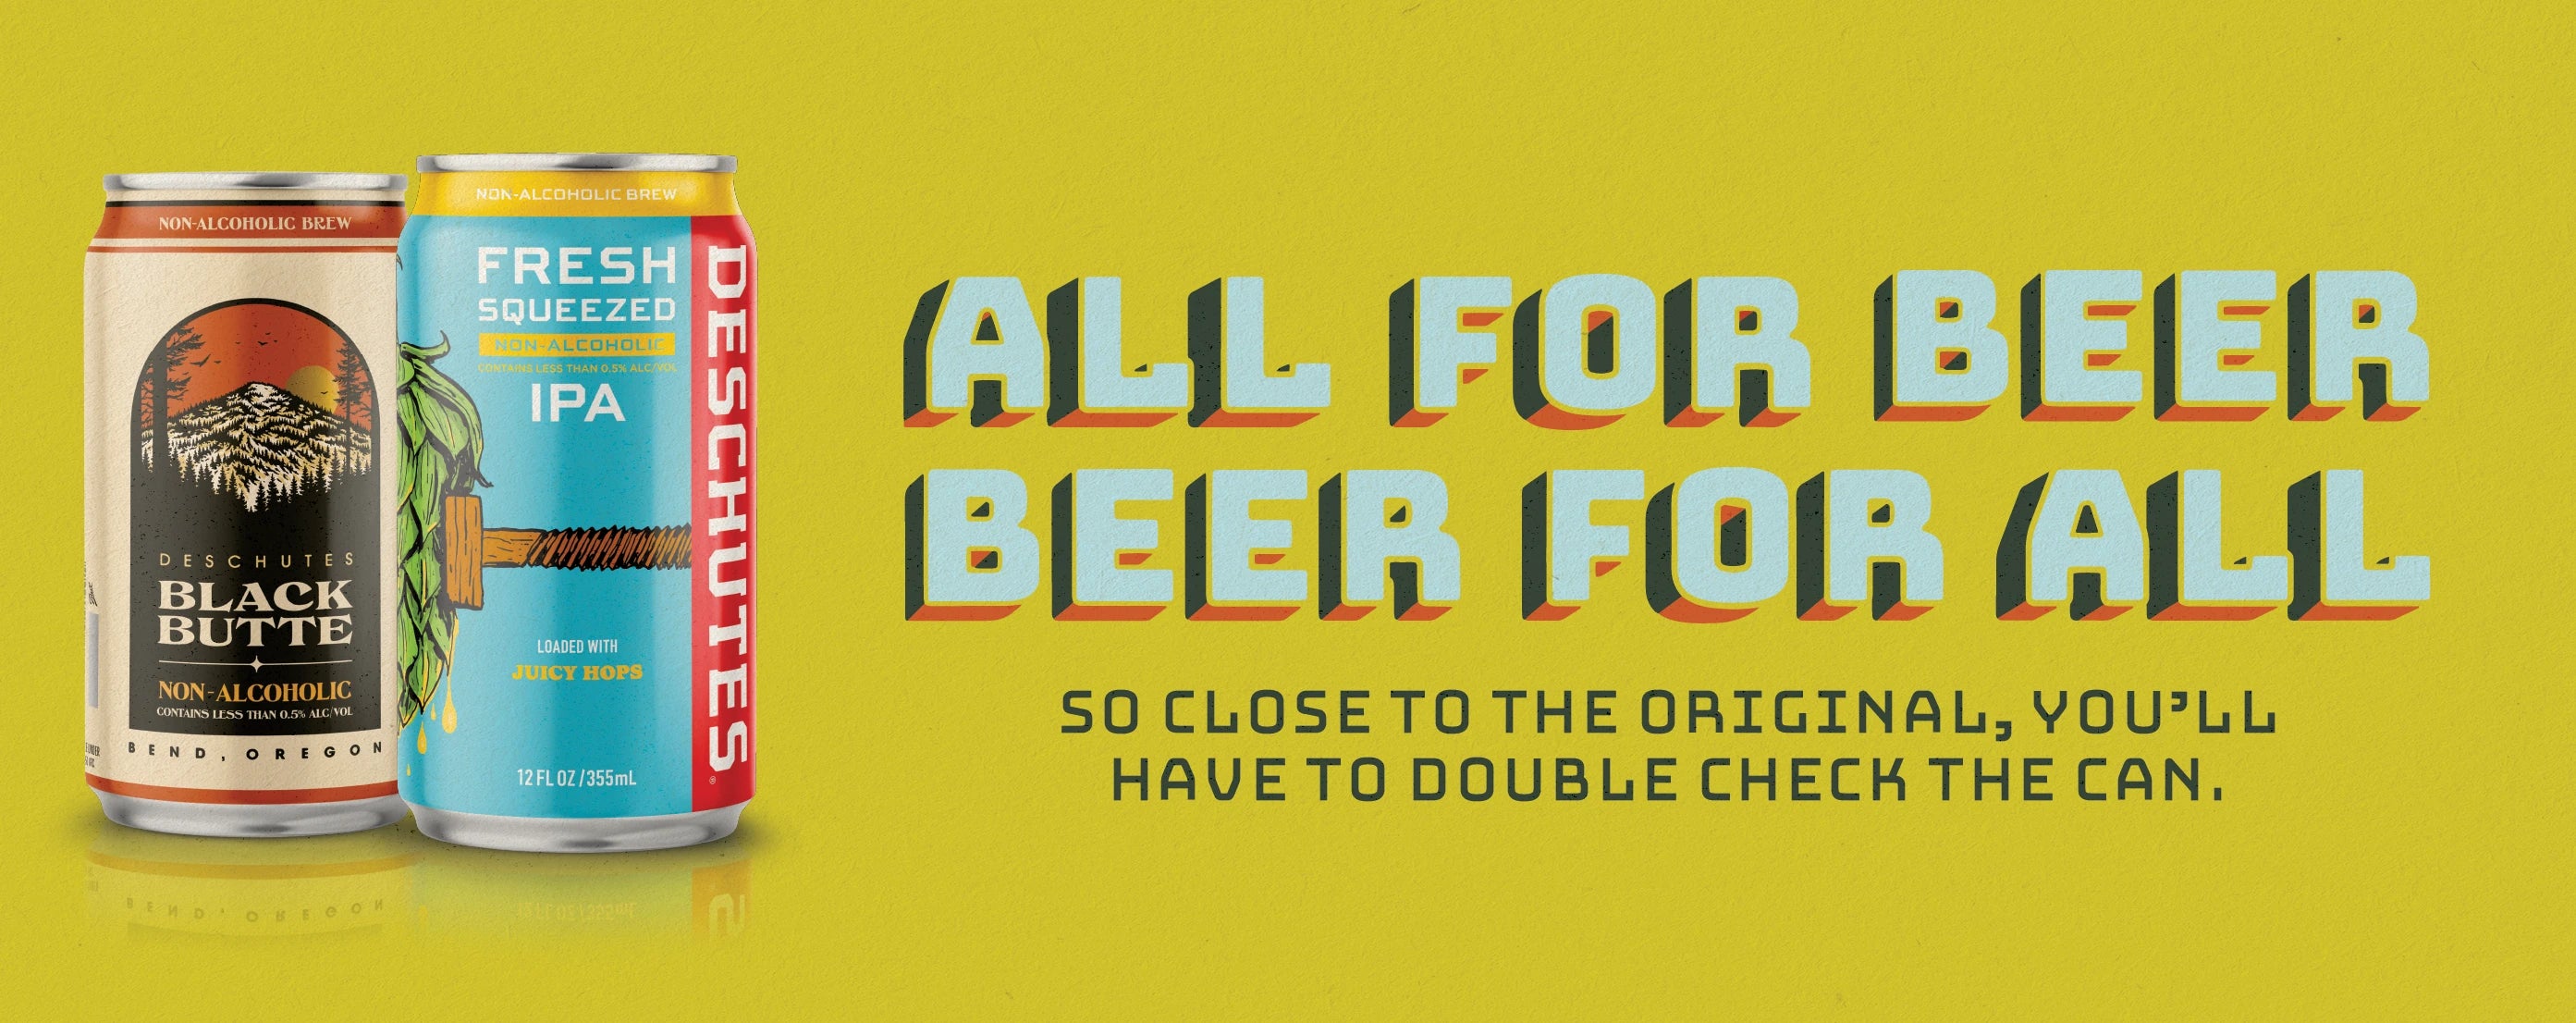 Promo graphic for Non-Alcoholic Fresh Squeezed and Black Butte Beer! All for Beer Beer for All. So close to the original, you'll have to double check the can.